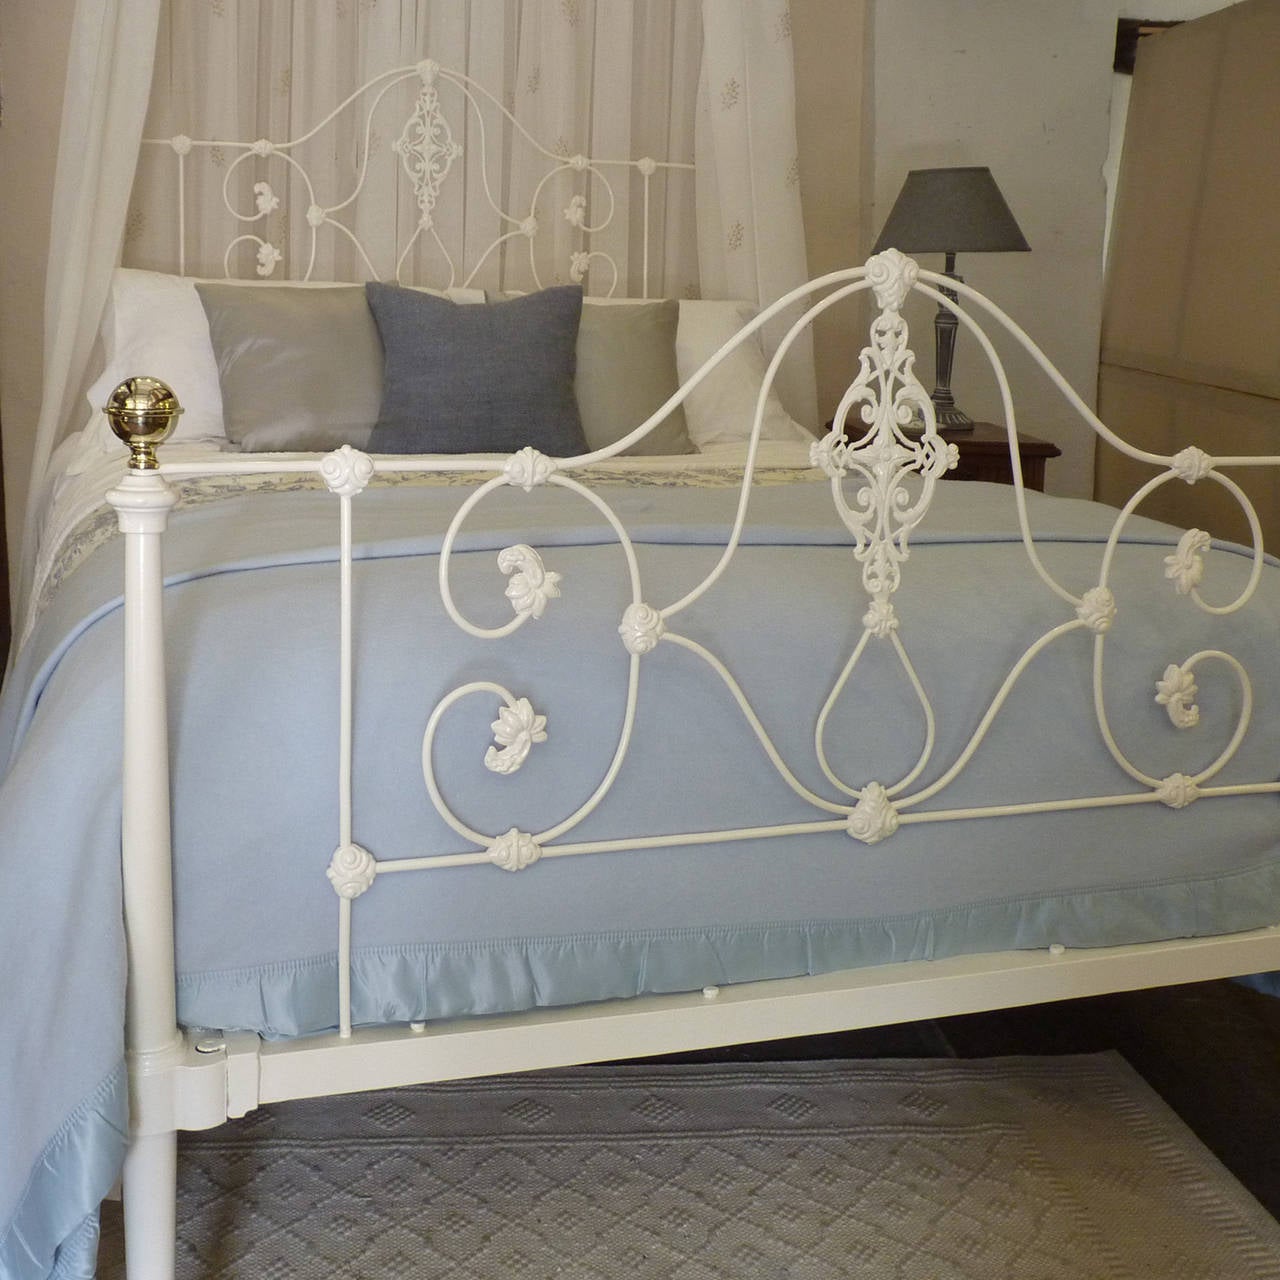 A fine example of a cast iron half tester bed finished in white. The ornate iron work on the panel decoration is typical of the era, as are the four tapered posts. The tall back posts support a half round canopy, from which drapes can be